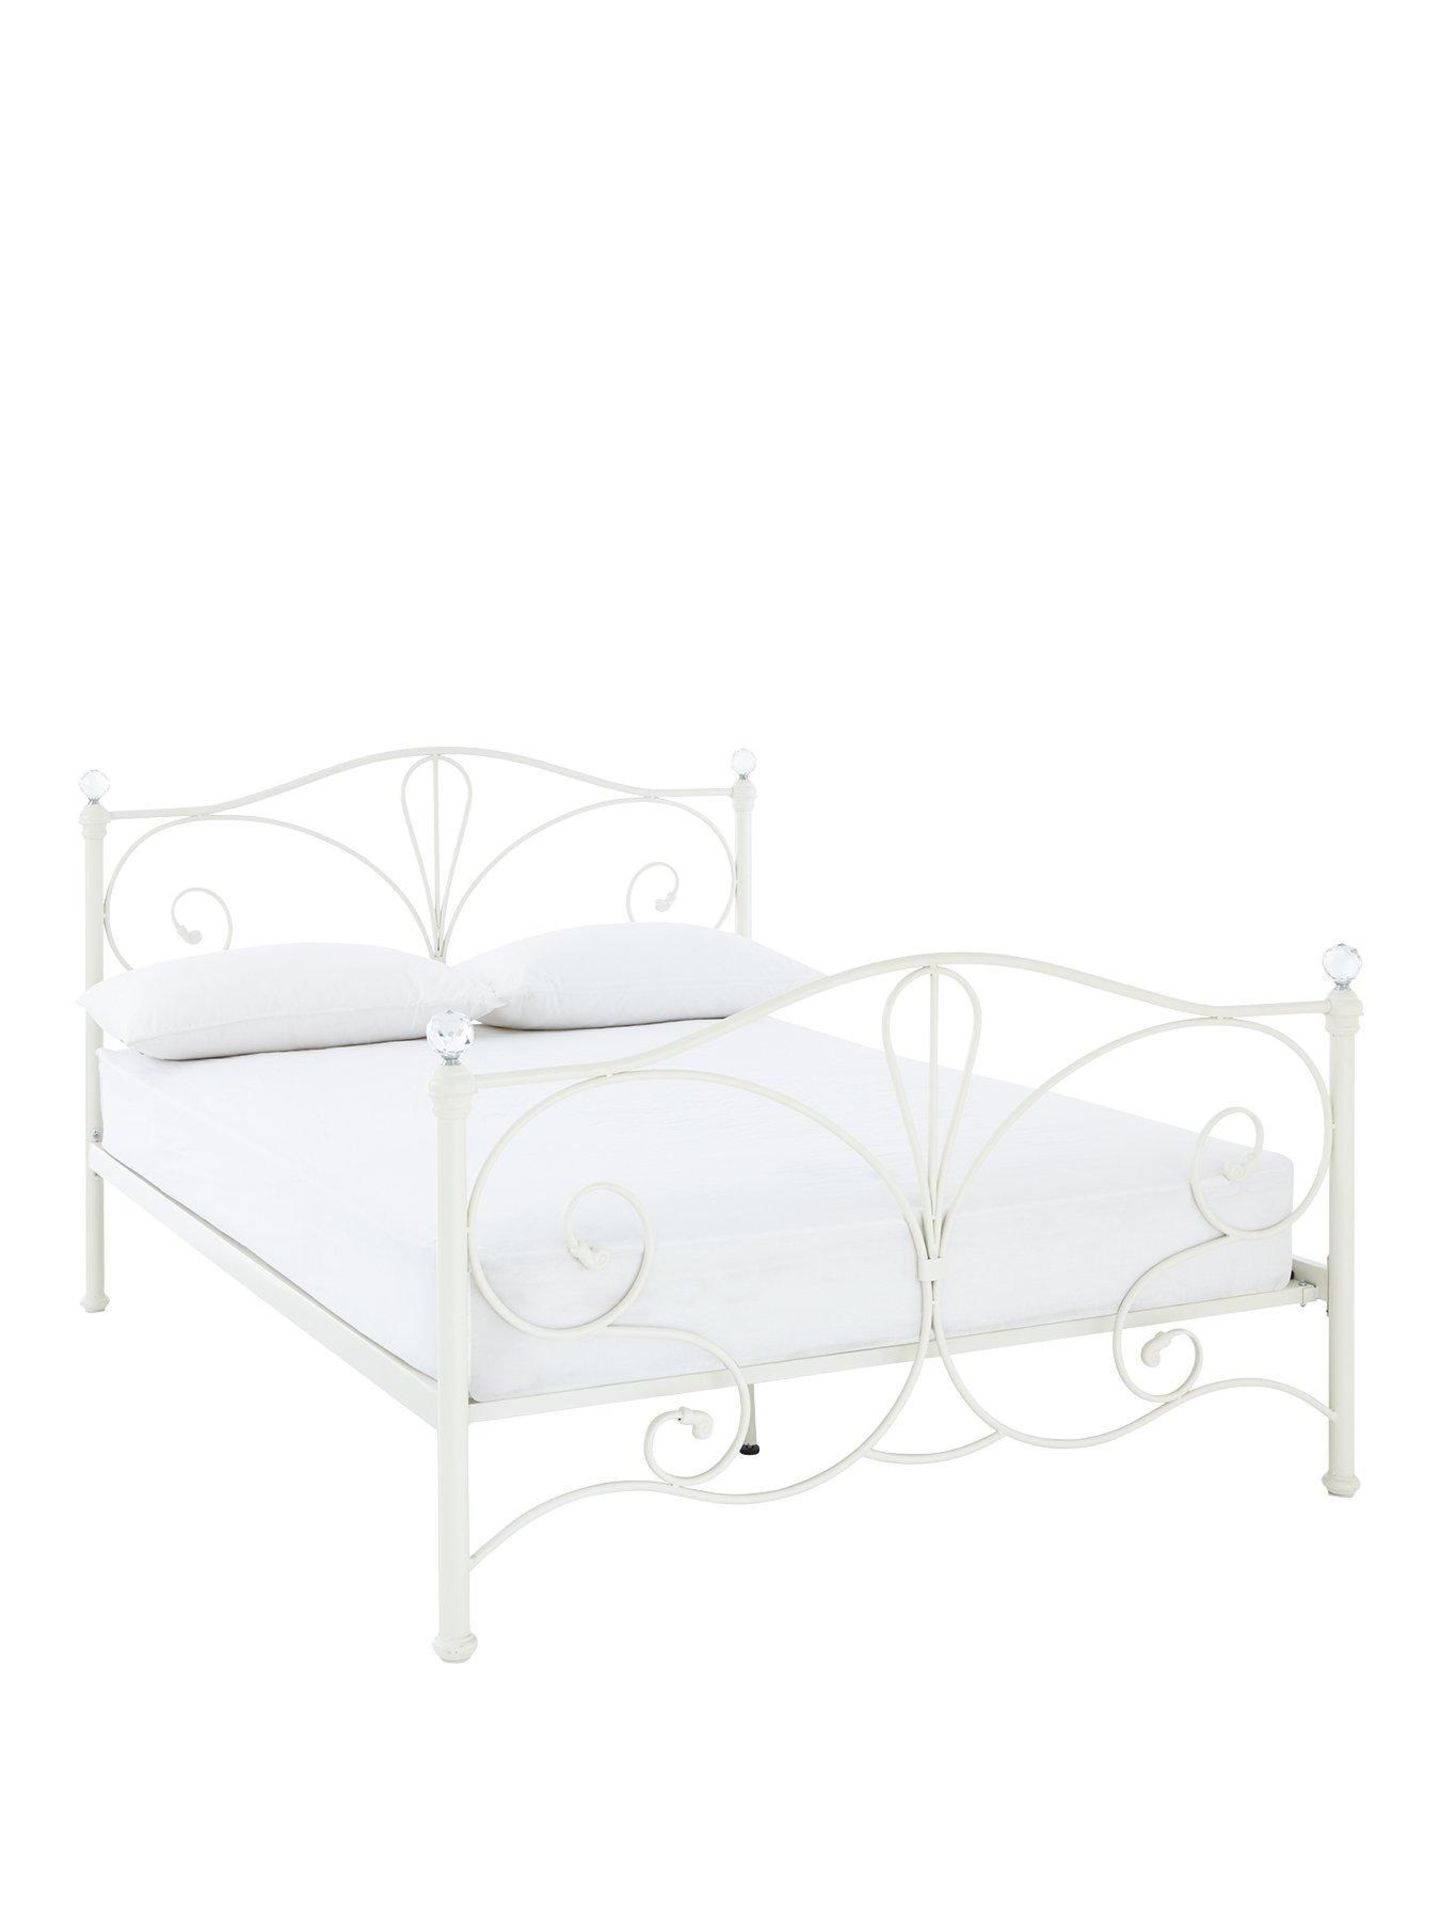 Boxed Item Claremont Small Double Bed [Ivory] 109X132X204Cm Rrp:£294.0 - Image 2 of 2